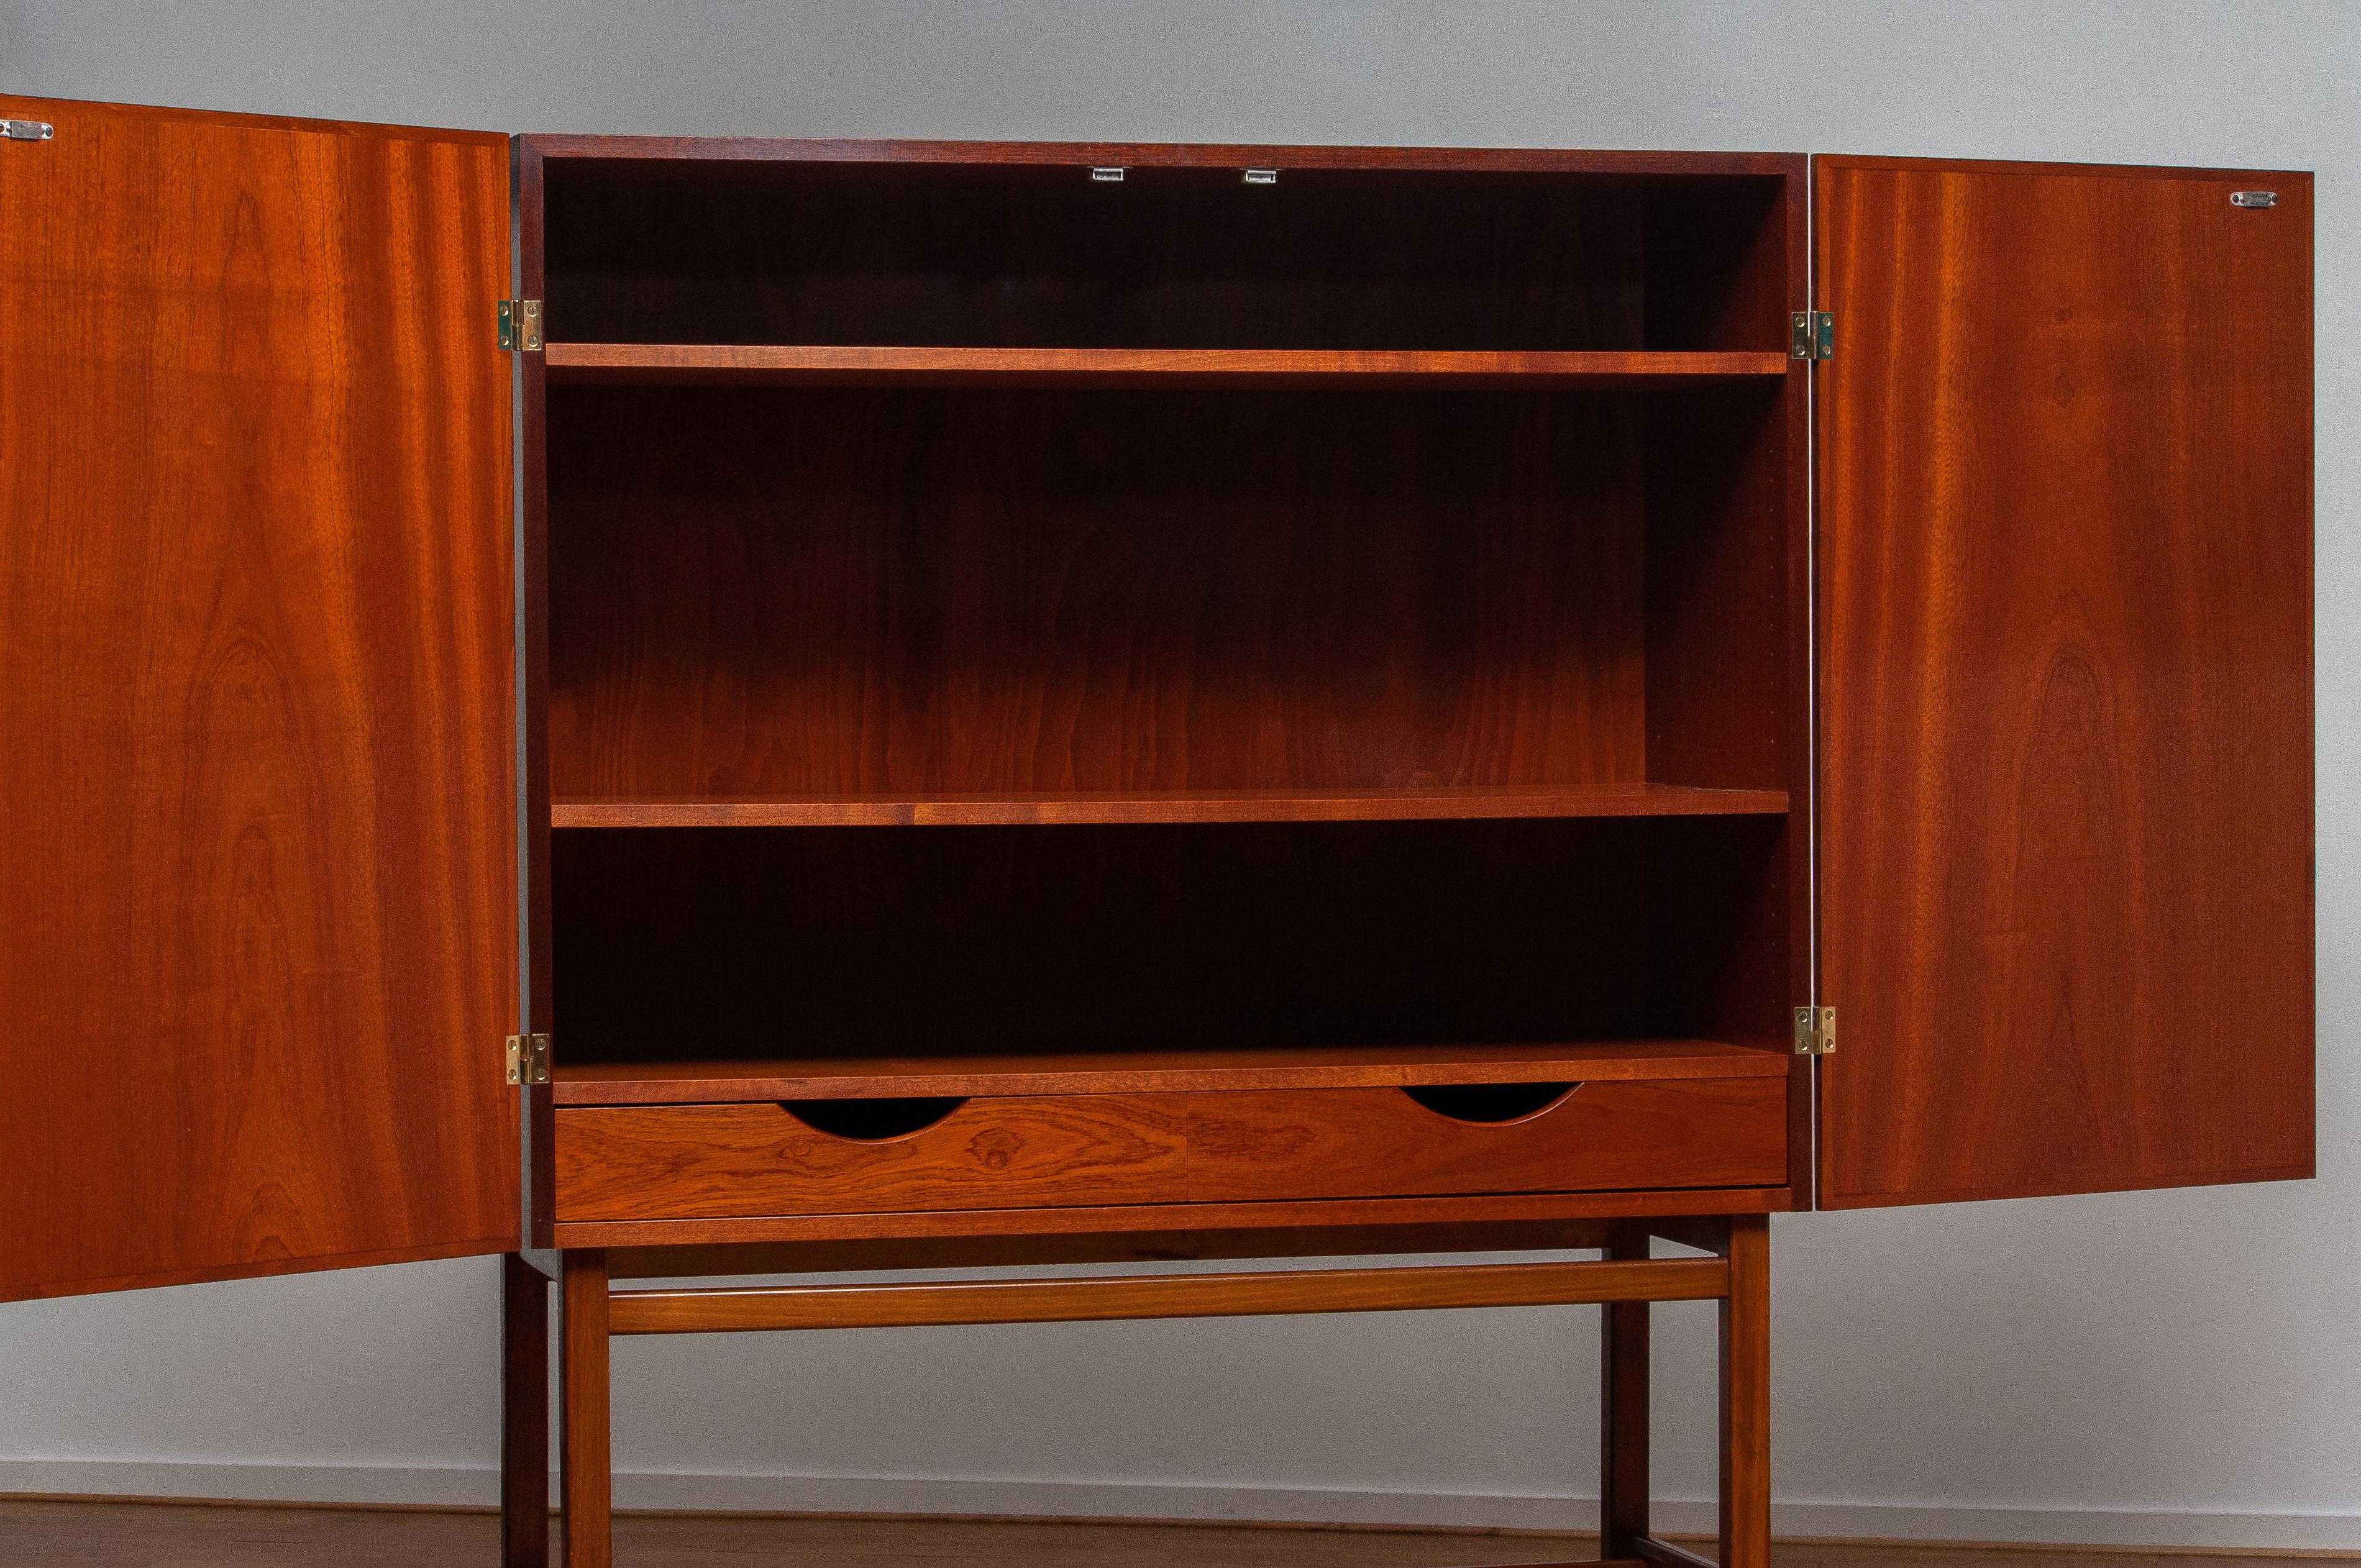 Beautiful dry bar / cabinet in mahogany made in Sweden, by Forenades Mobler of Linkoping, 1950s.
Equipped with two doors with behind two drawers and two adjustable shelves.
Standing on slim and tall legs.

The overall condition is very good.